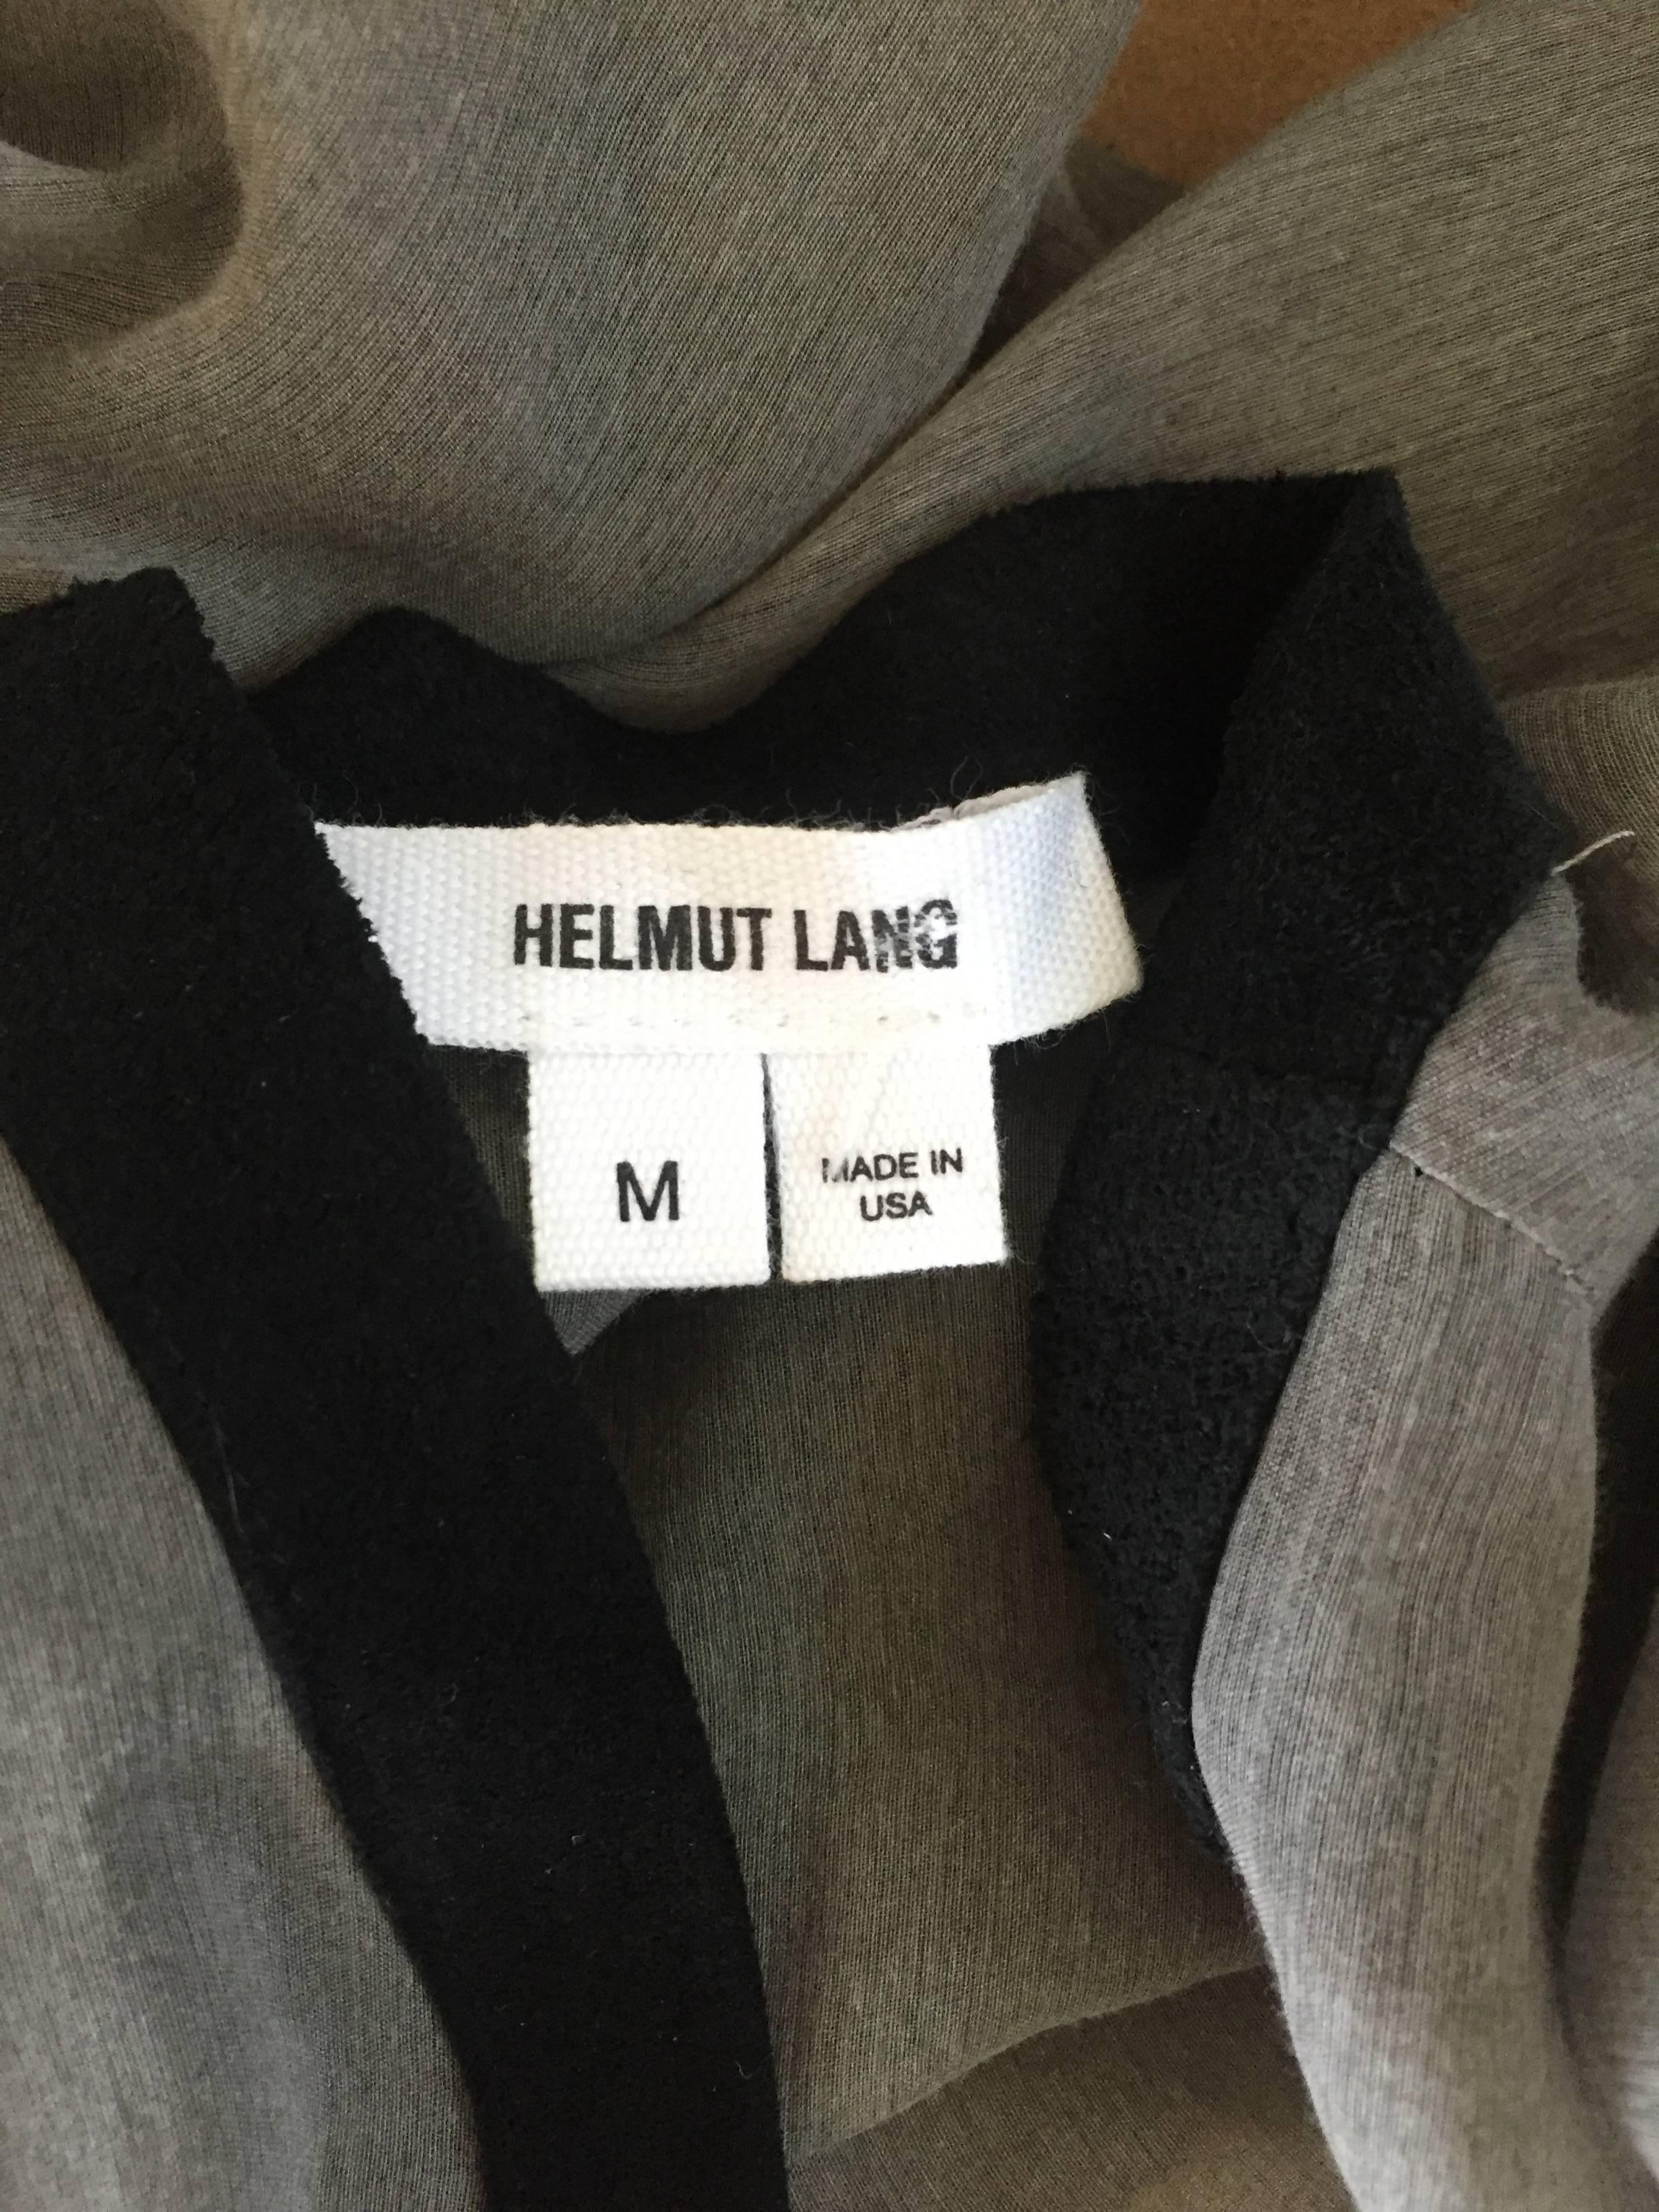 Helmut Lang 2000s Silk + Leather Semi Sheer Long Sleeve Vintage Blouse / Tunic For Sale 2